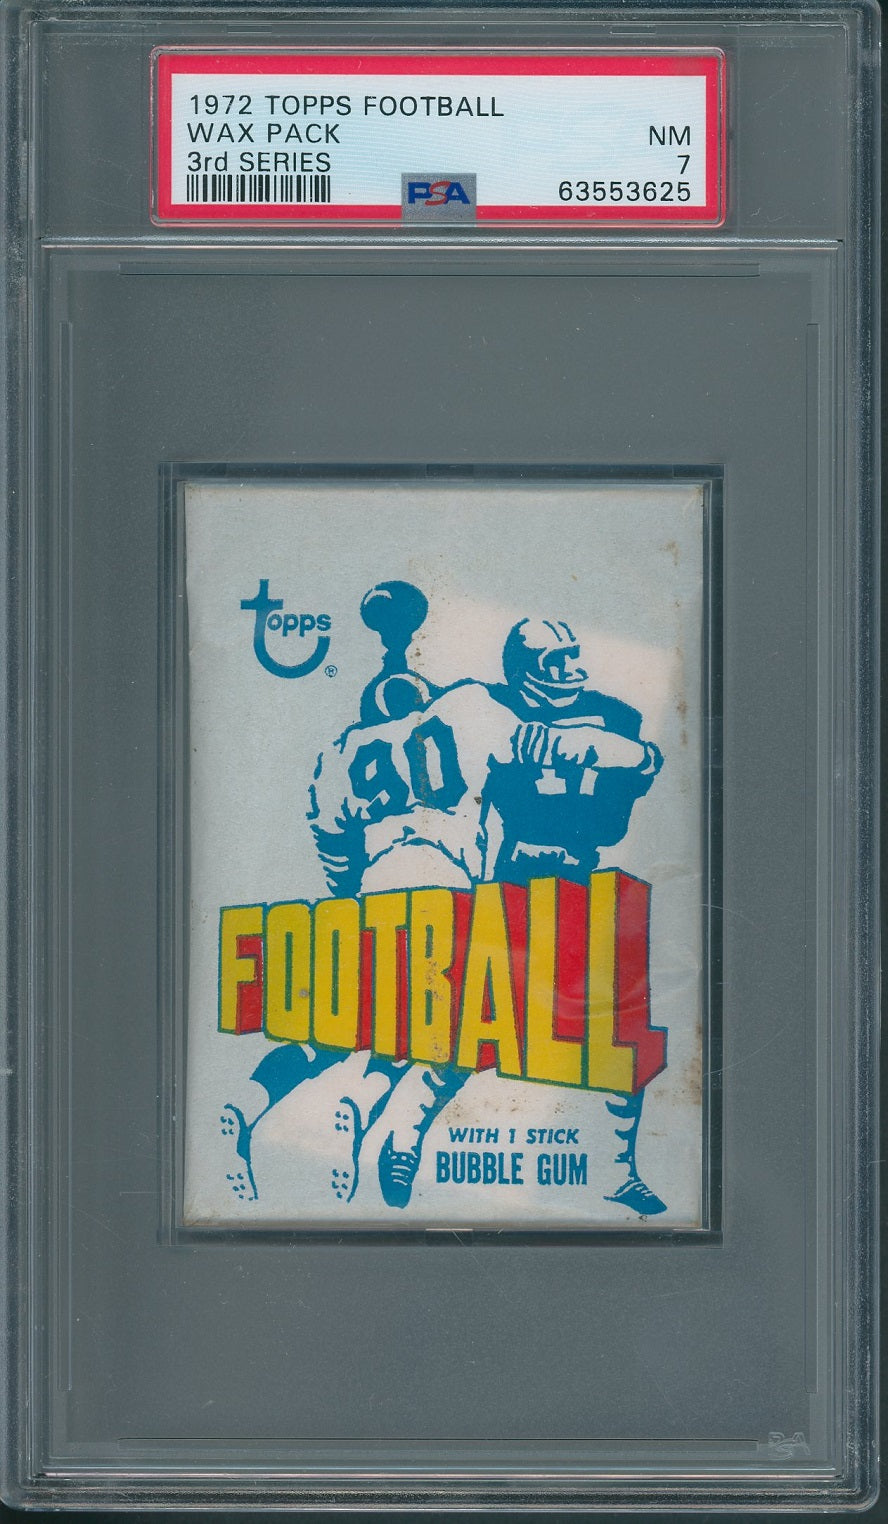 1972 Topps Football Unopened 3rd Series Wax Pack PSA 7 (*3625)